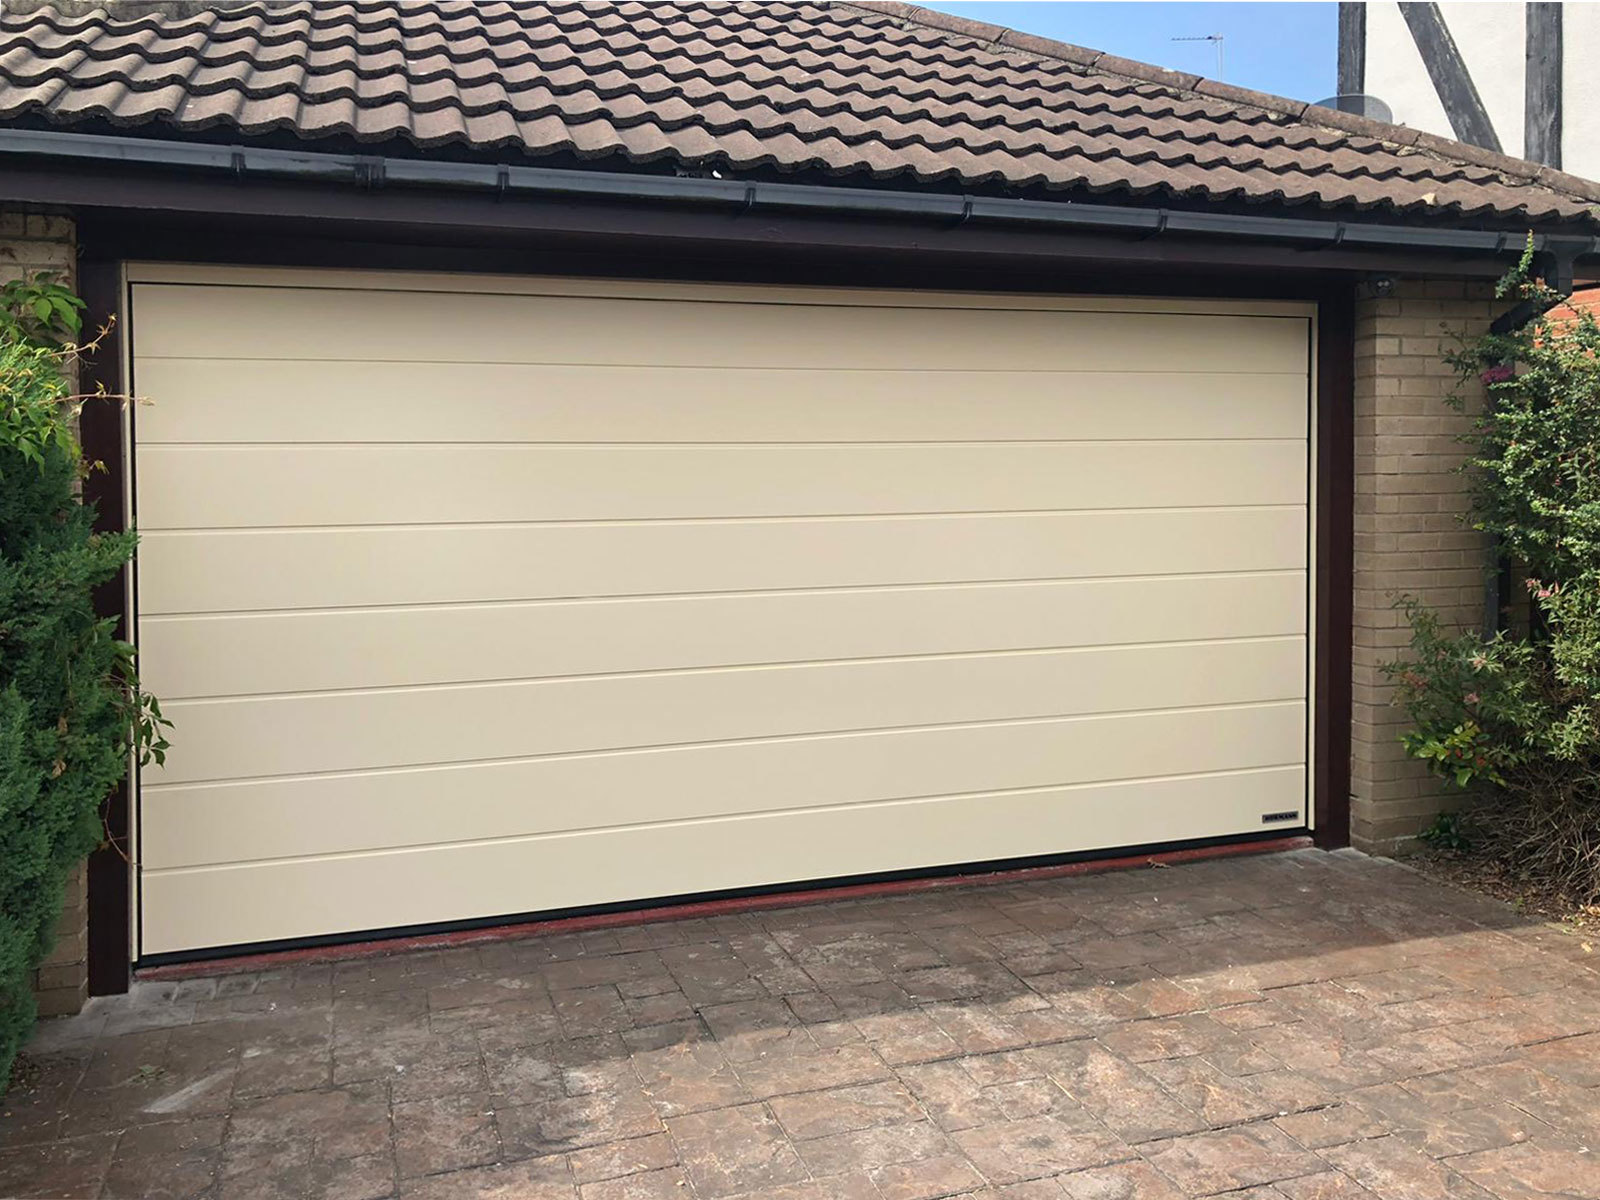 Cream Centre Ribbed Sectional Garage Door, South Manchester & Cheshire